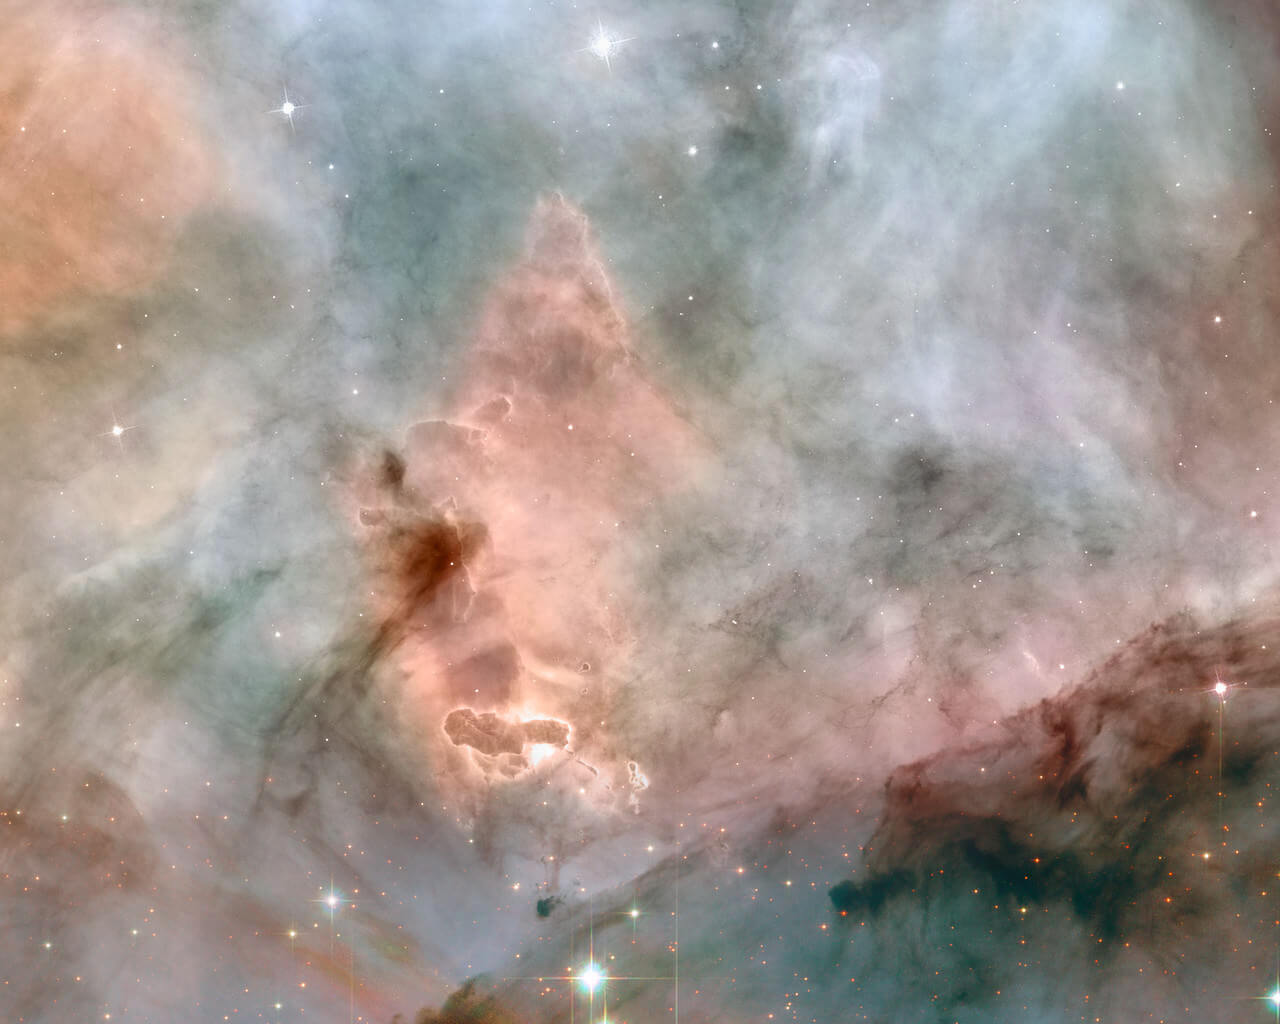 space is so cool - hubble pictures 5 (1)